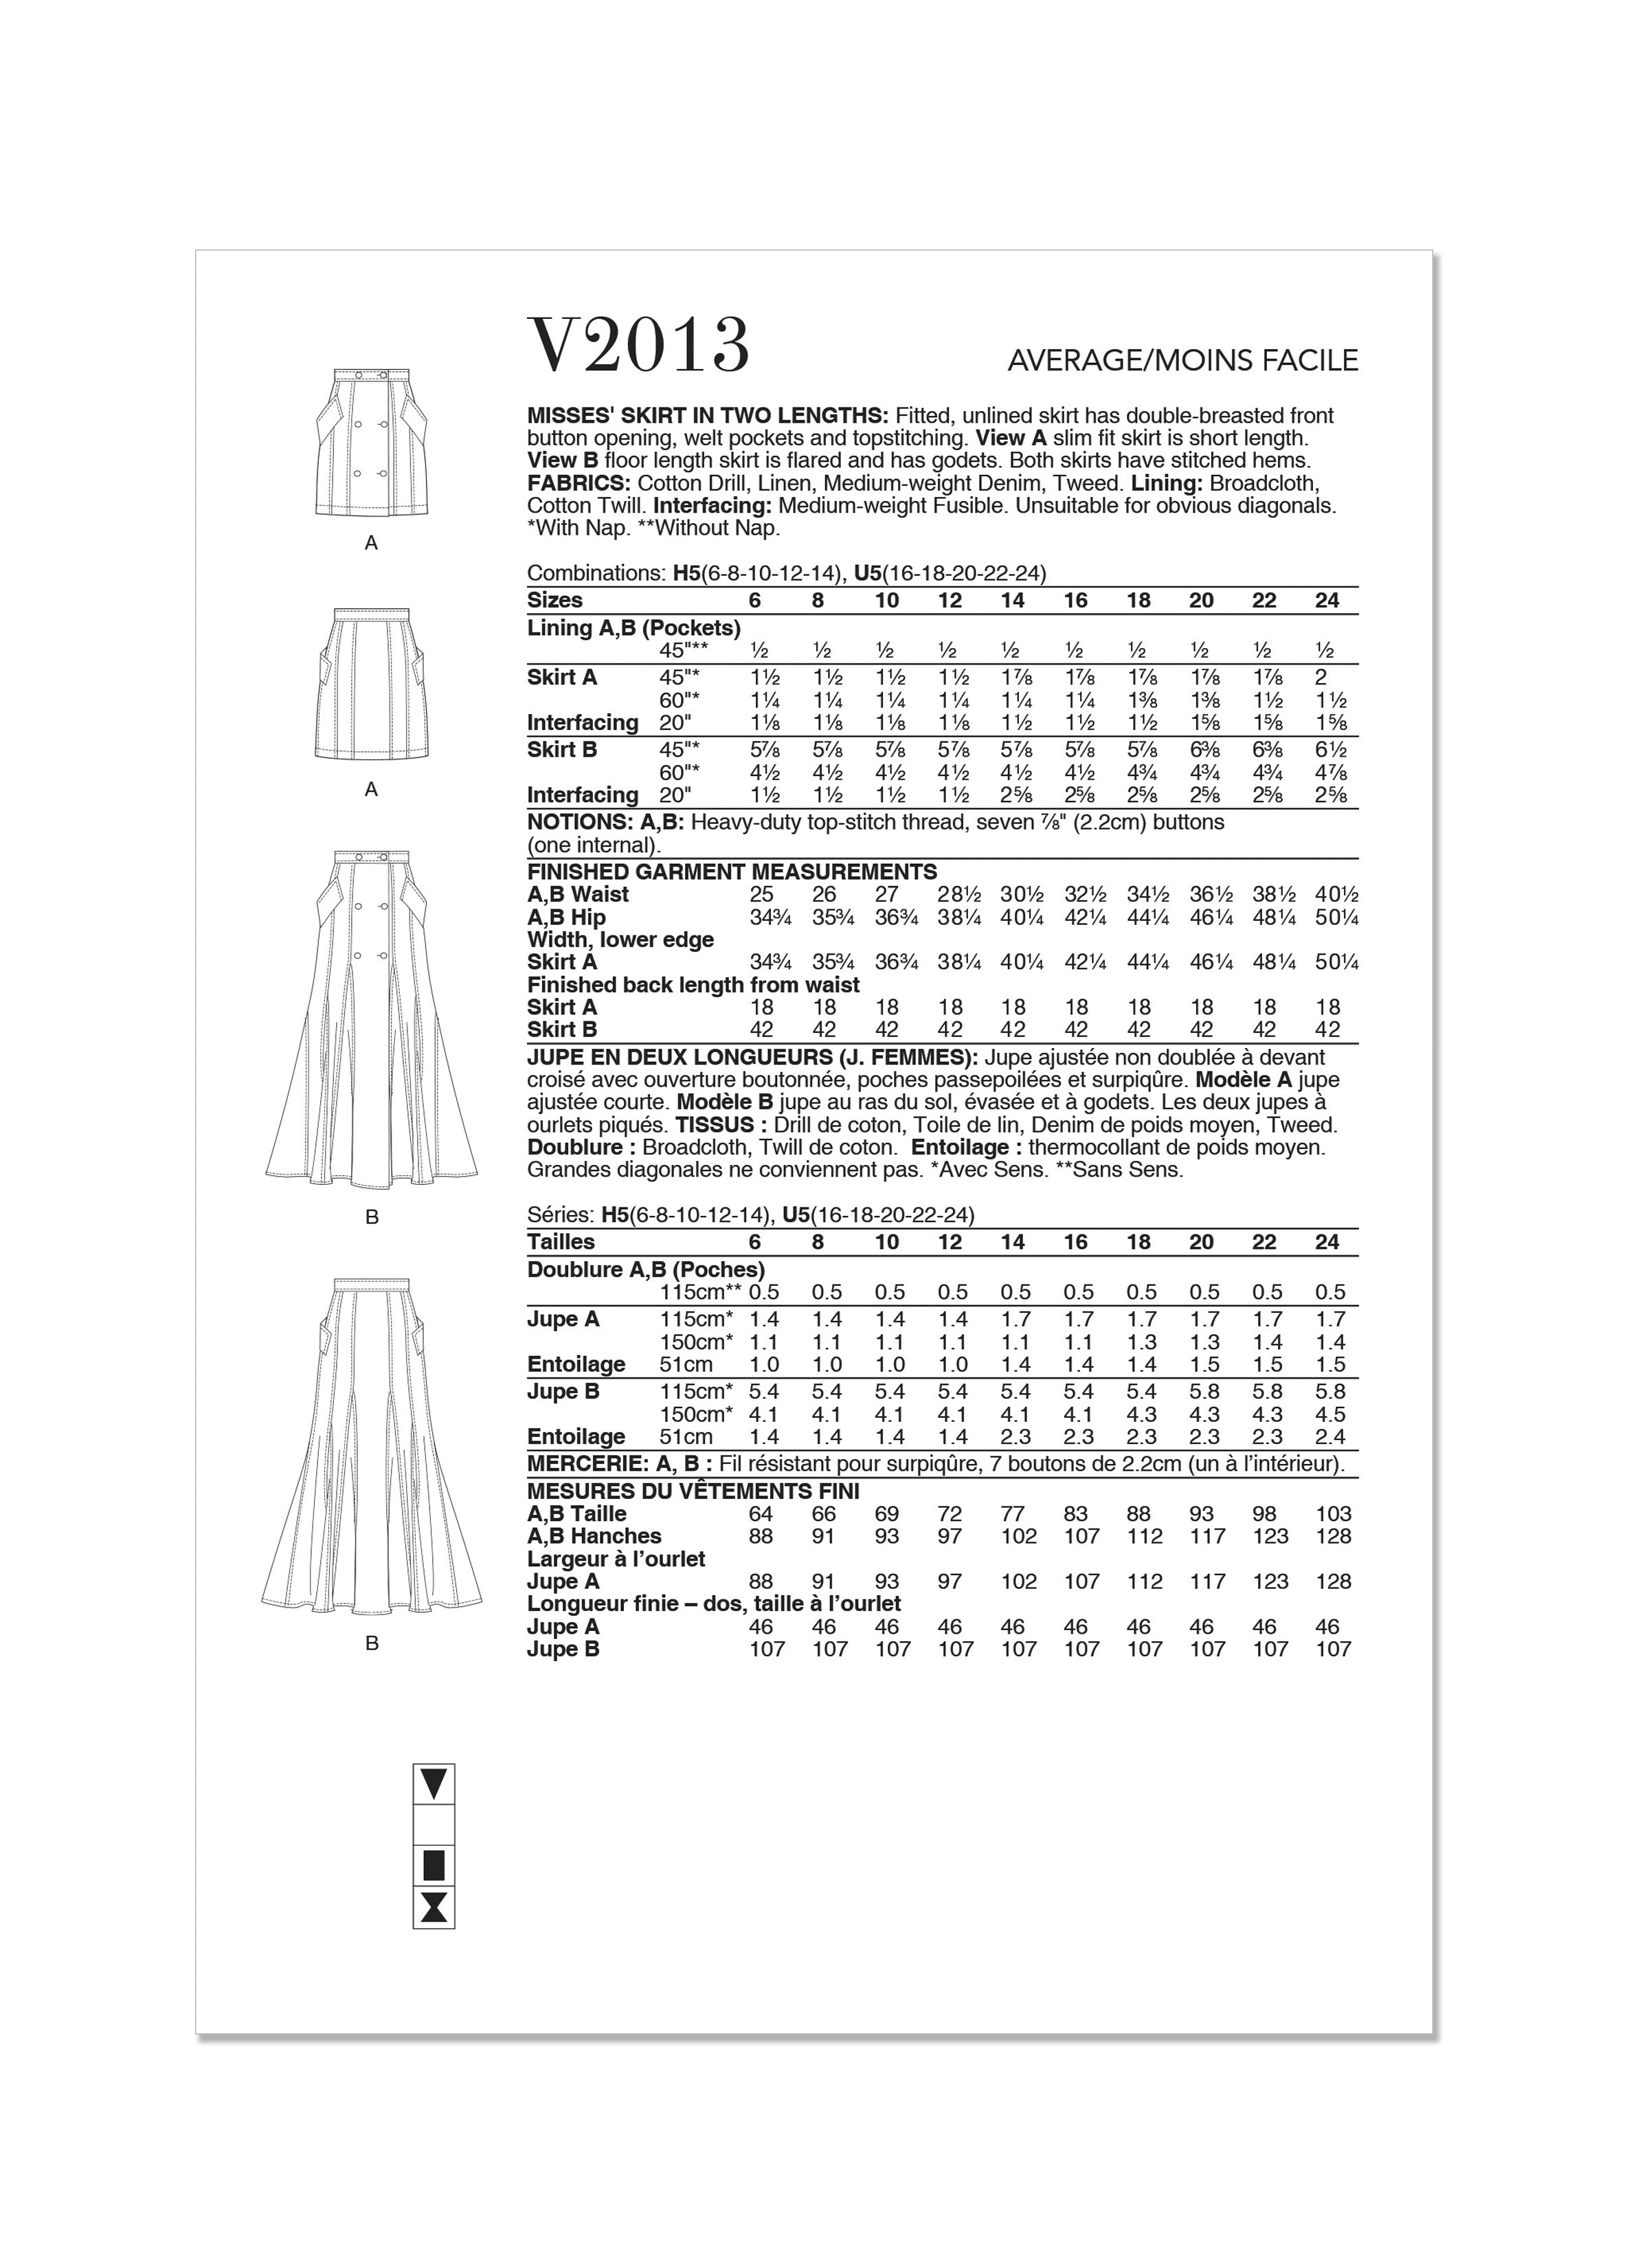 Vogue Sewing Pattern 2013 Misses' Skirt in Two Lengths from Jaycotts Sewing Supplies